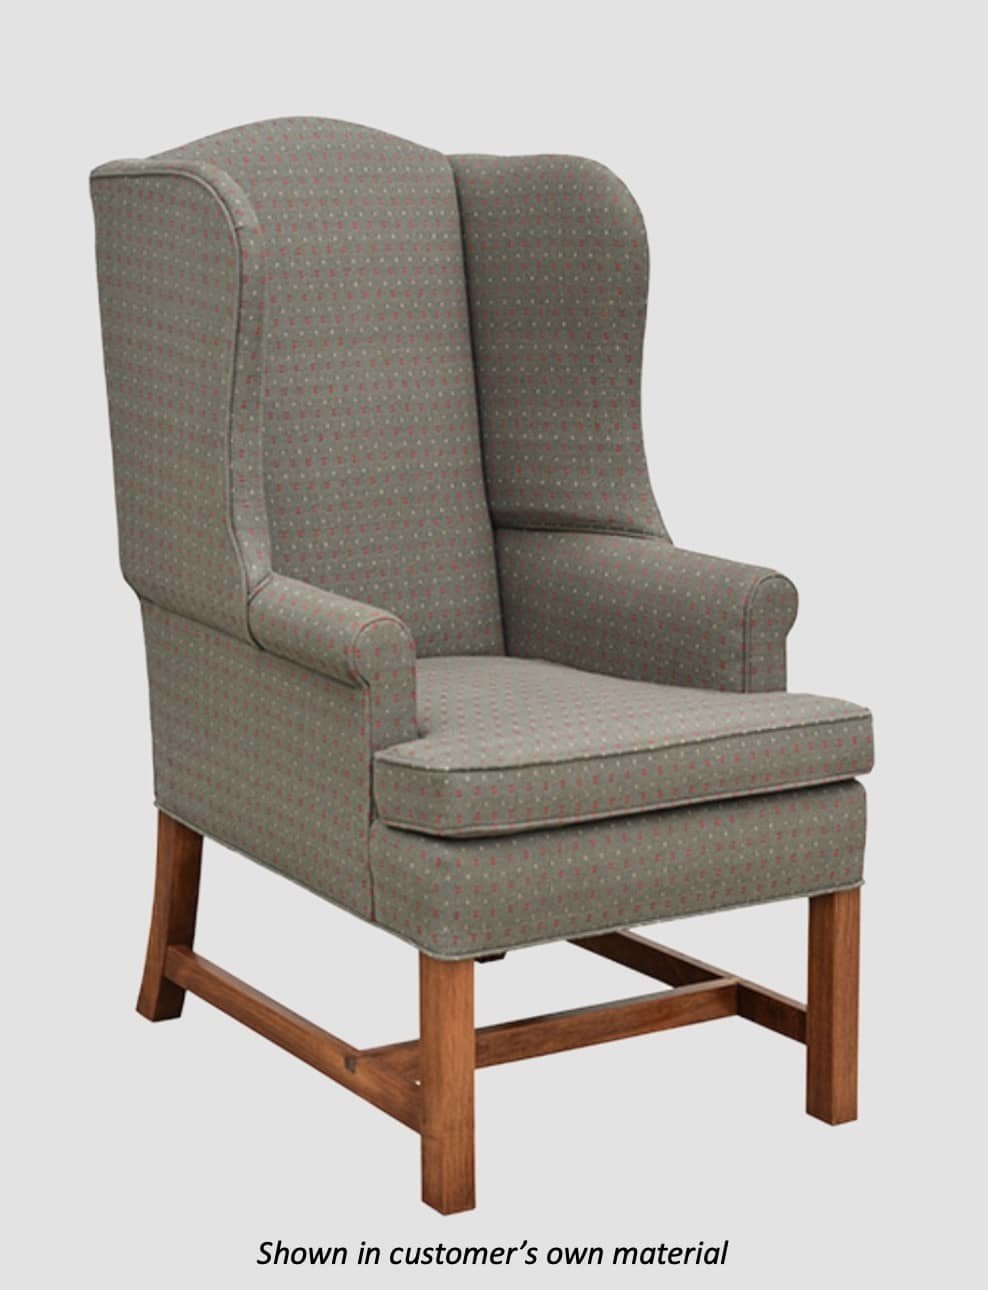 Town & Country Furnishings Hearthside Chair from the American Primitive Collection Brand: Town & Country Furnishings